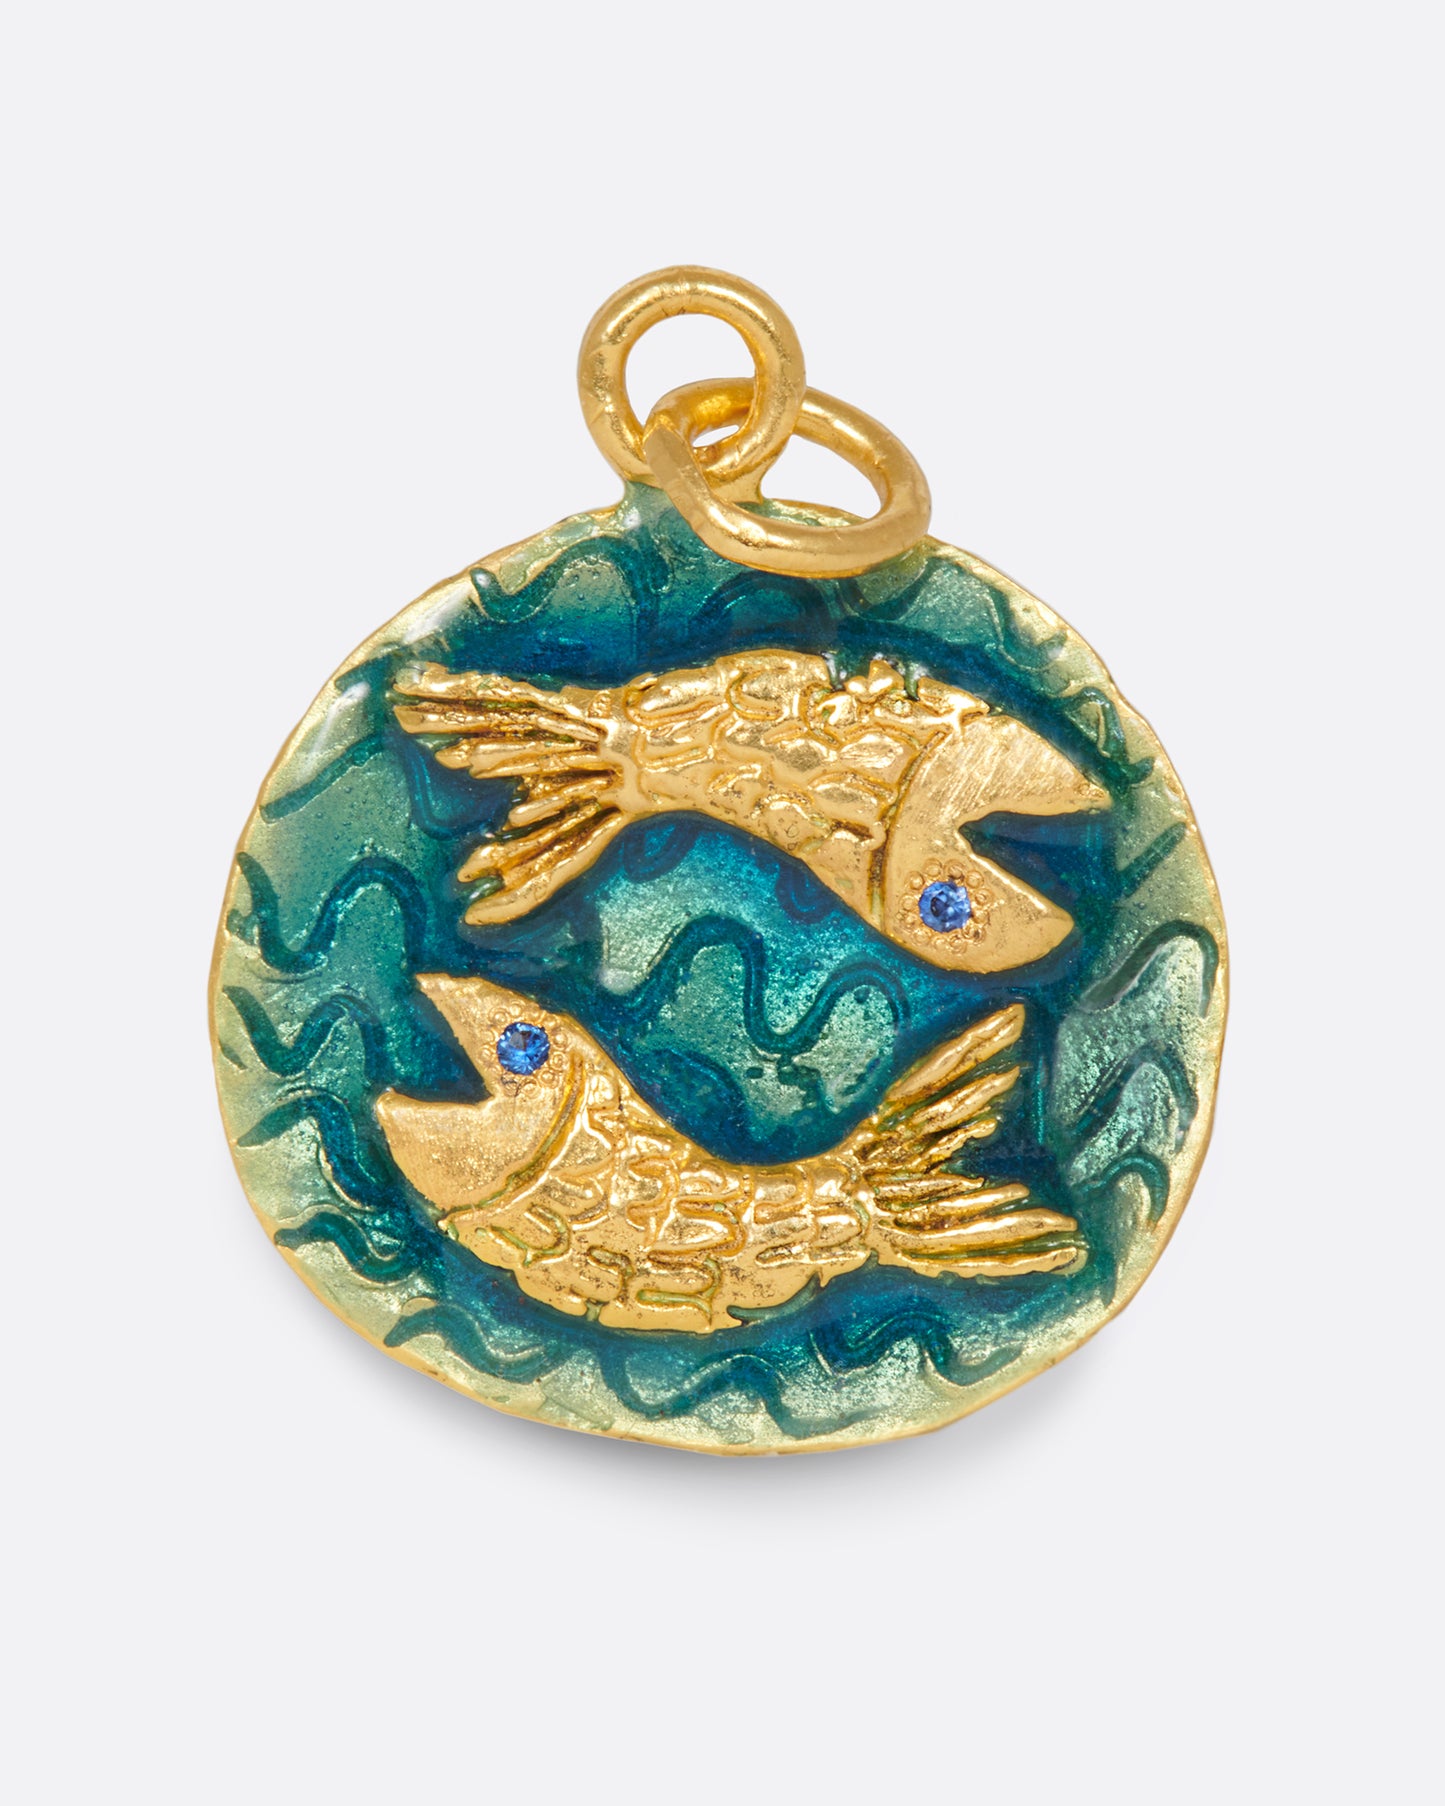 A round hand-sculpted pendant with the Pisces symbol, each fish with a blue sapphire eye.